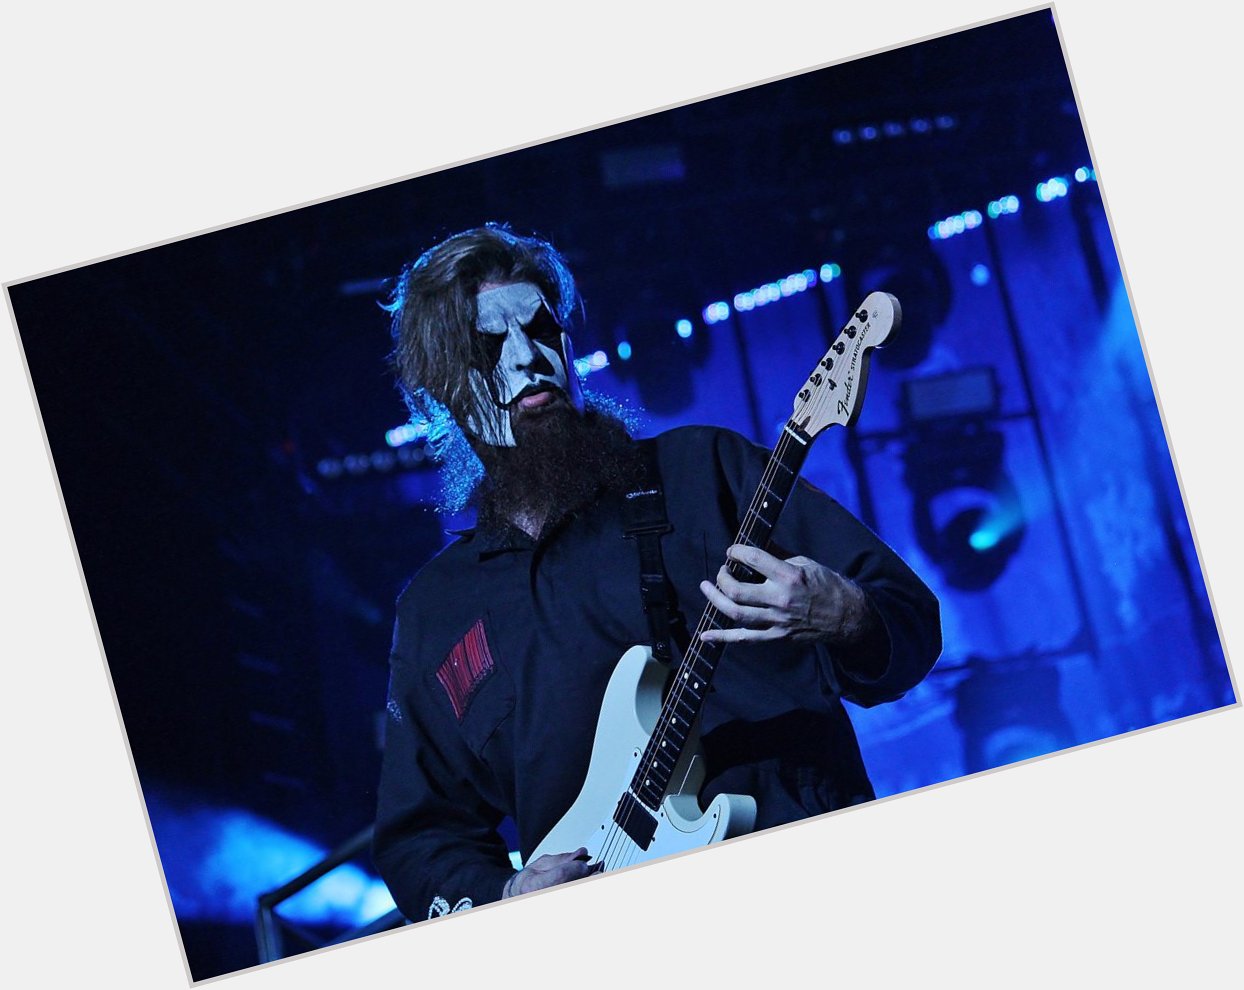 HAPPY BIRTHDAY JIM ROOT. HOW ABOUT SOME TO SHOW THE ROCK LOVE !! 